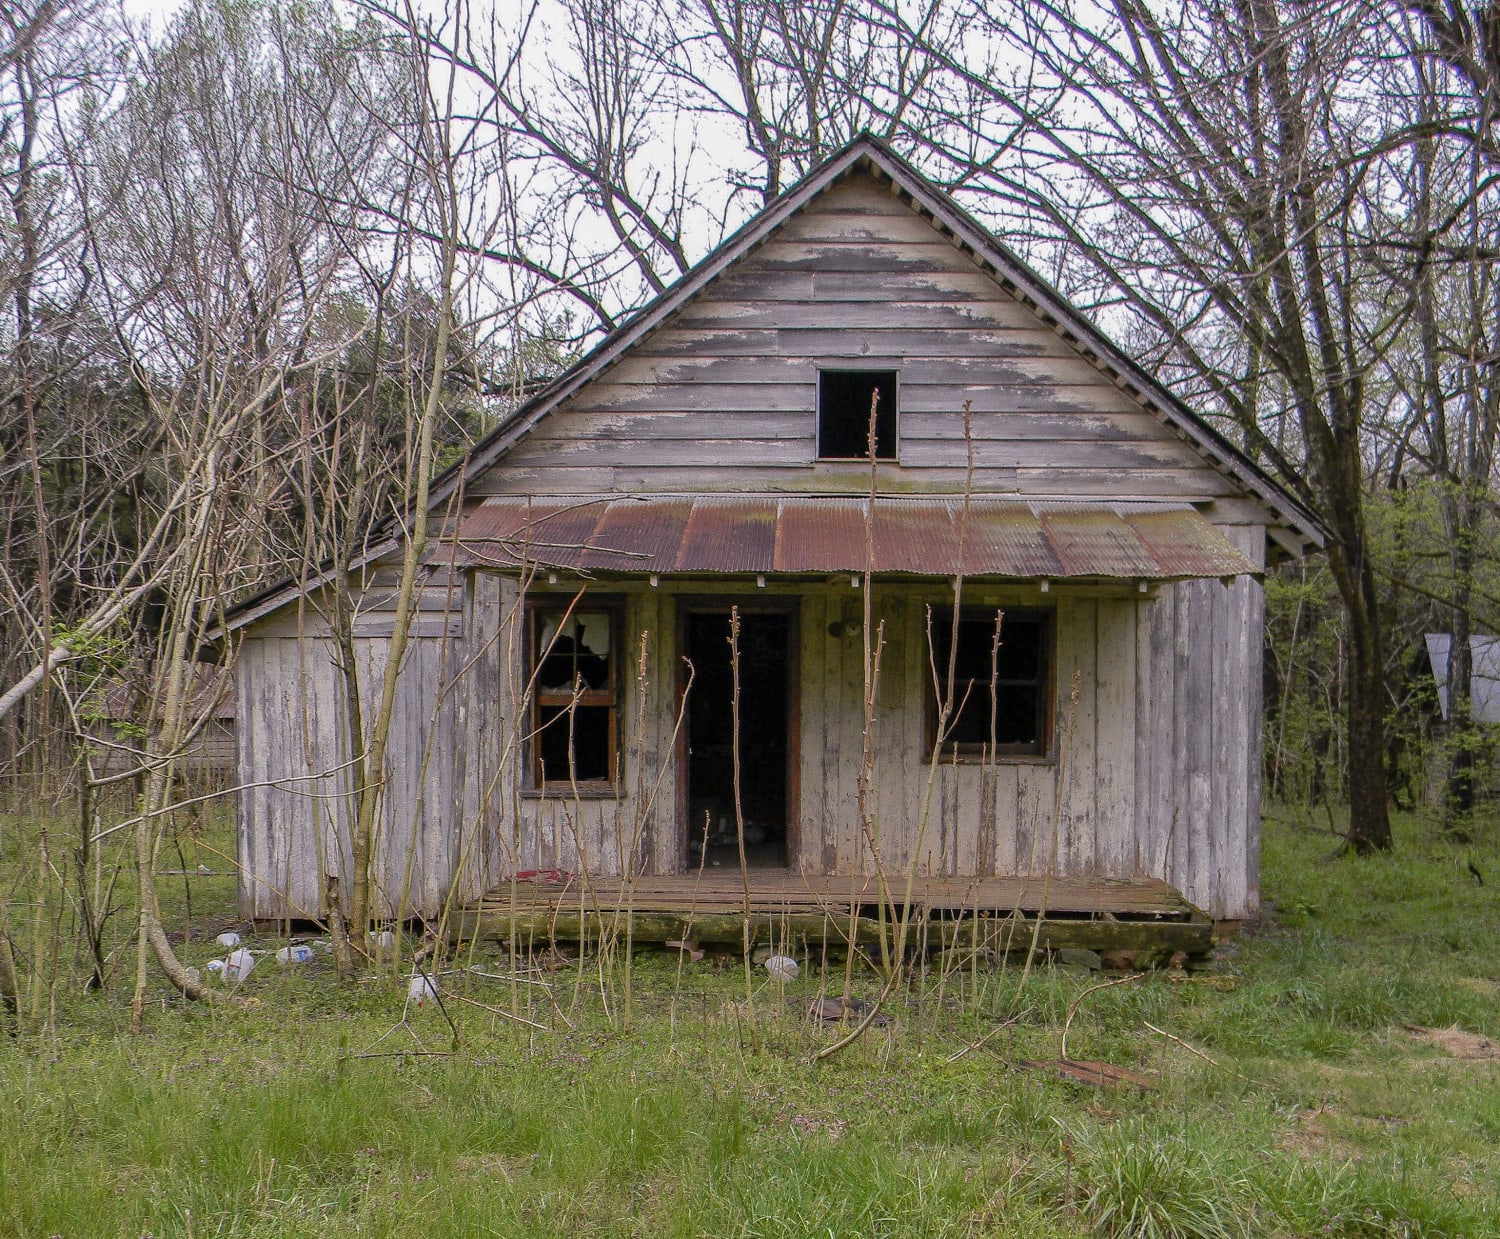 Creepy abandoned cabin in the middle of the woods, abandoned since 2003 or longer. Took this in February, 2018. Will upload interior shots whenever I find them.